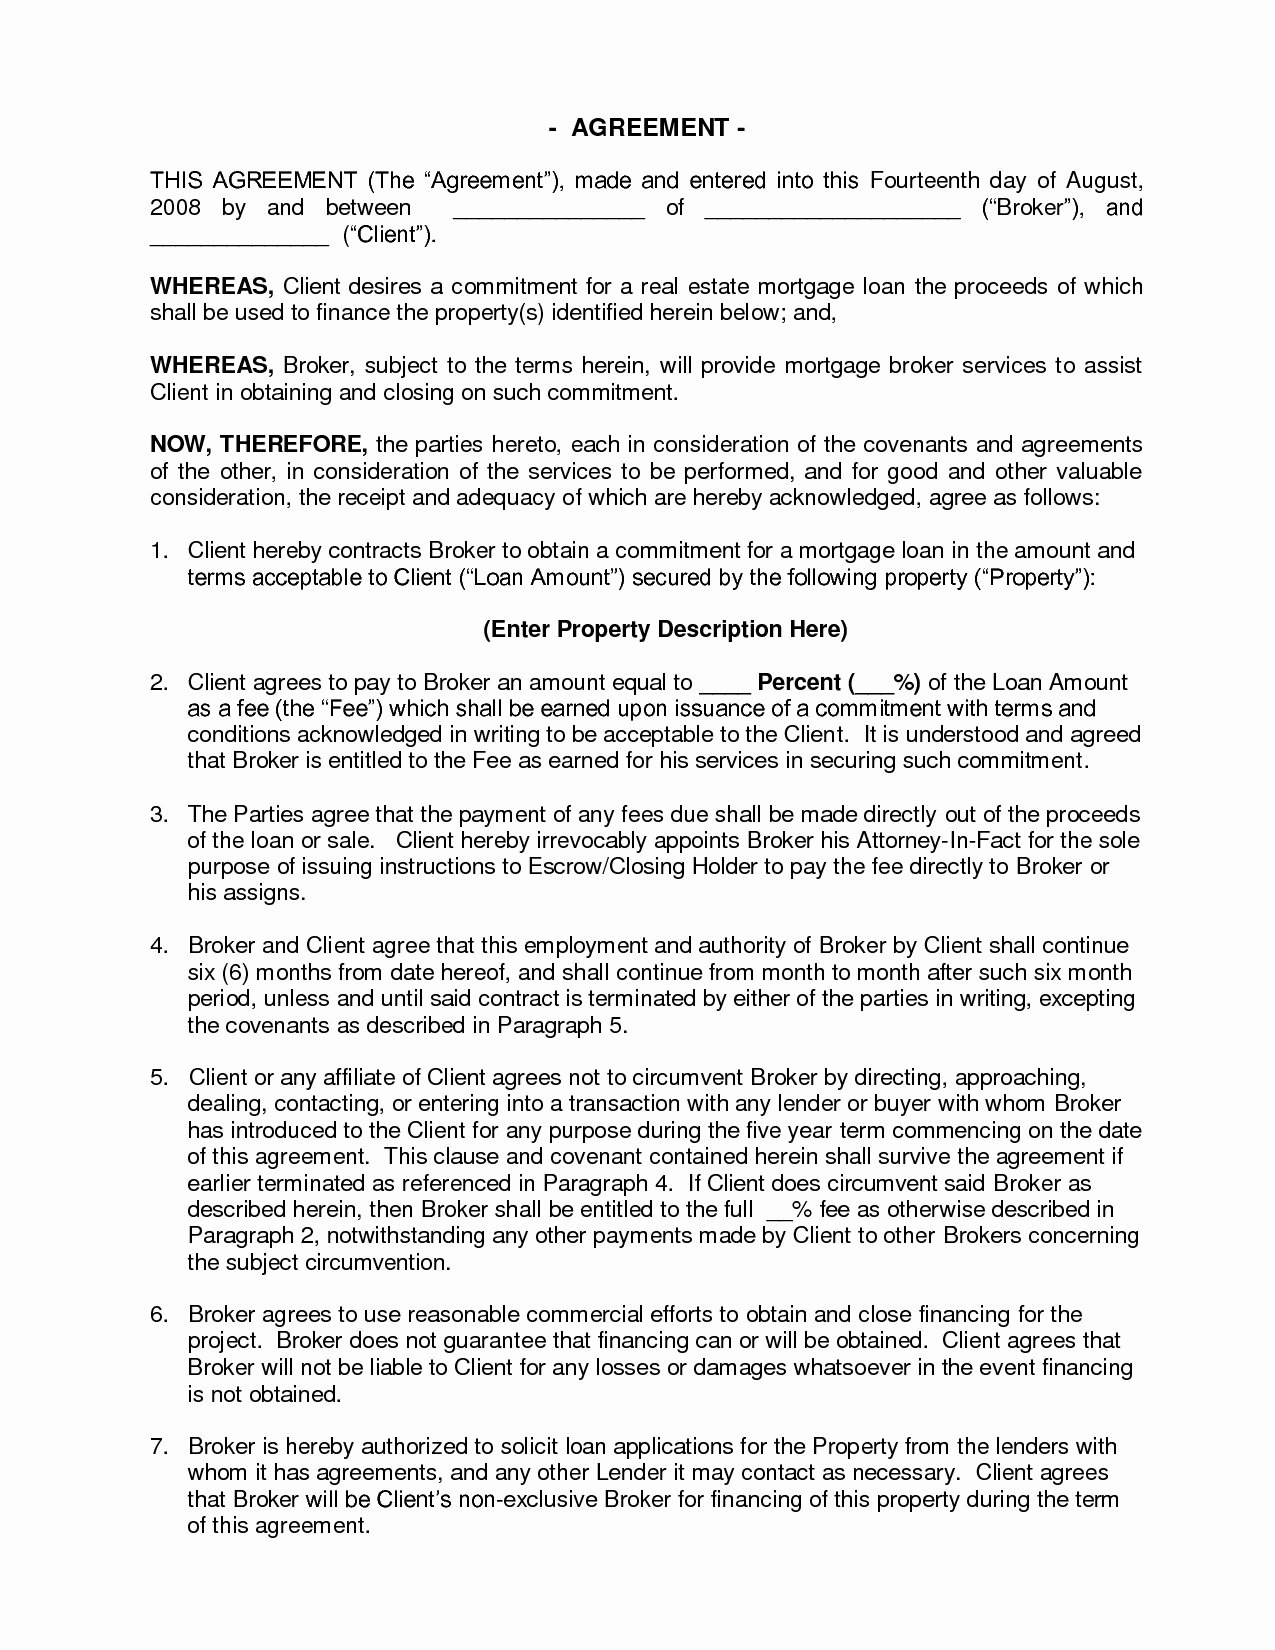 Net 30 Terms Agreement Template Awesome 37 Last Mercial Mortgage Broker Fee Agreement Template